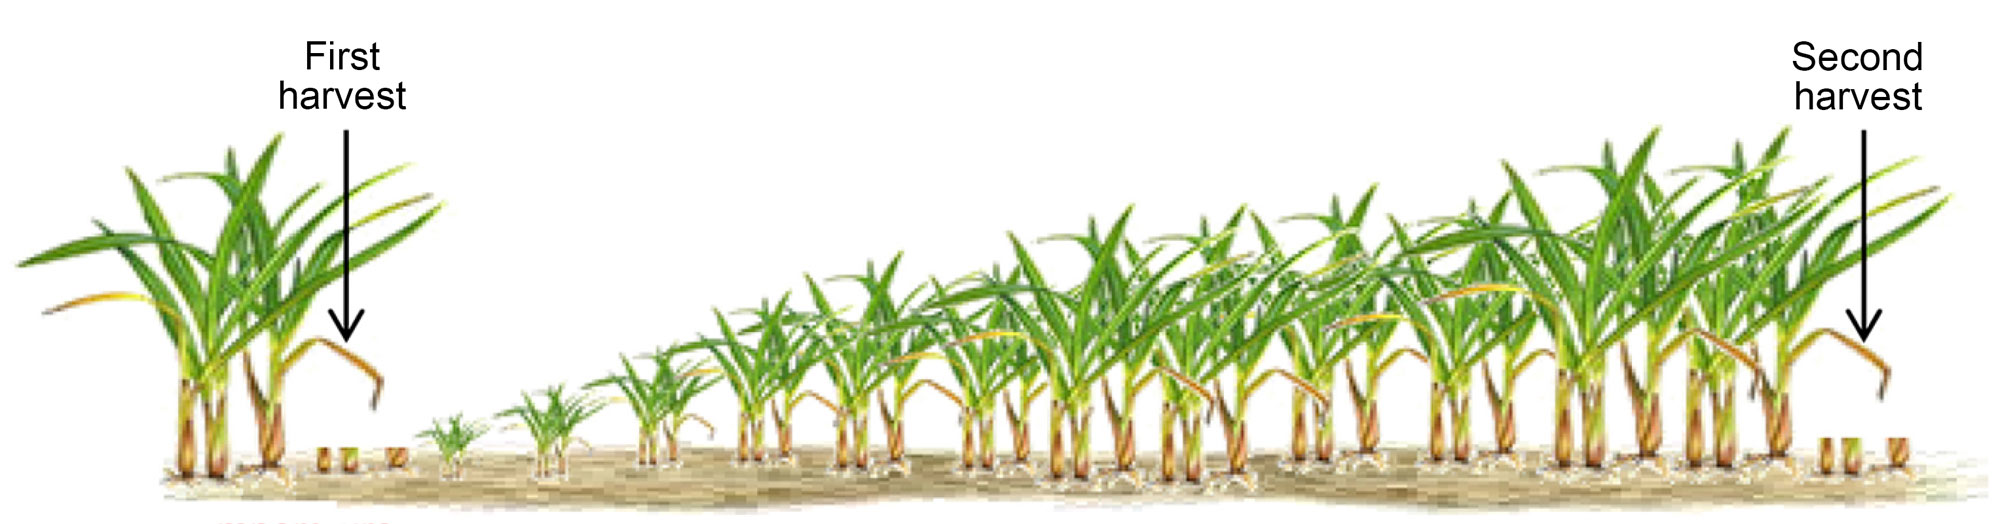 Digram showing the process of ratooning. In the diagram, sugarcane plants are cut, leaving just the bases of the stalks sticking out of the ground. The stalks then resprout, producing a second crop of sugarcane. The second crop is cut, leaving the bases of the stalks sticking out of the ground.